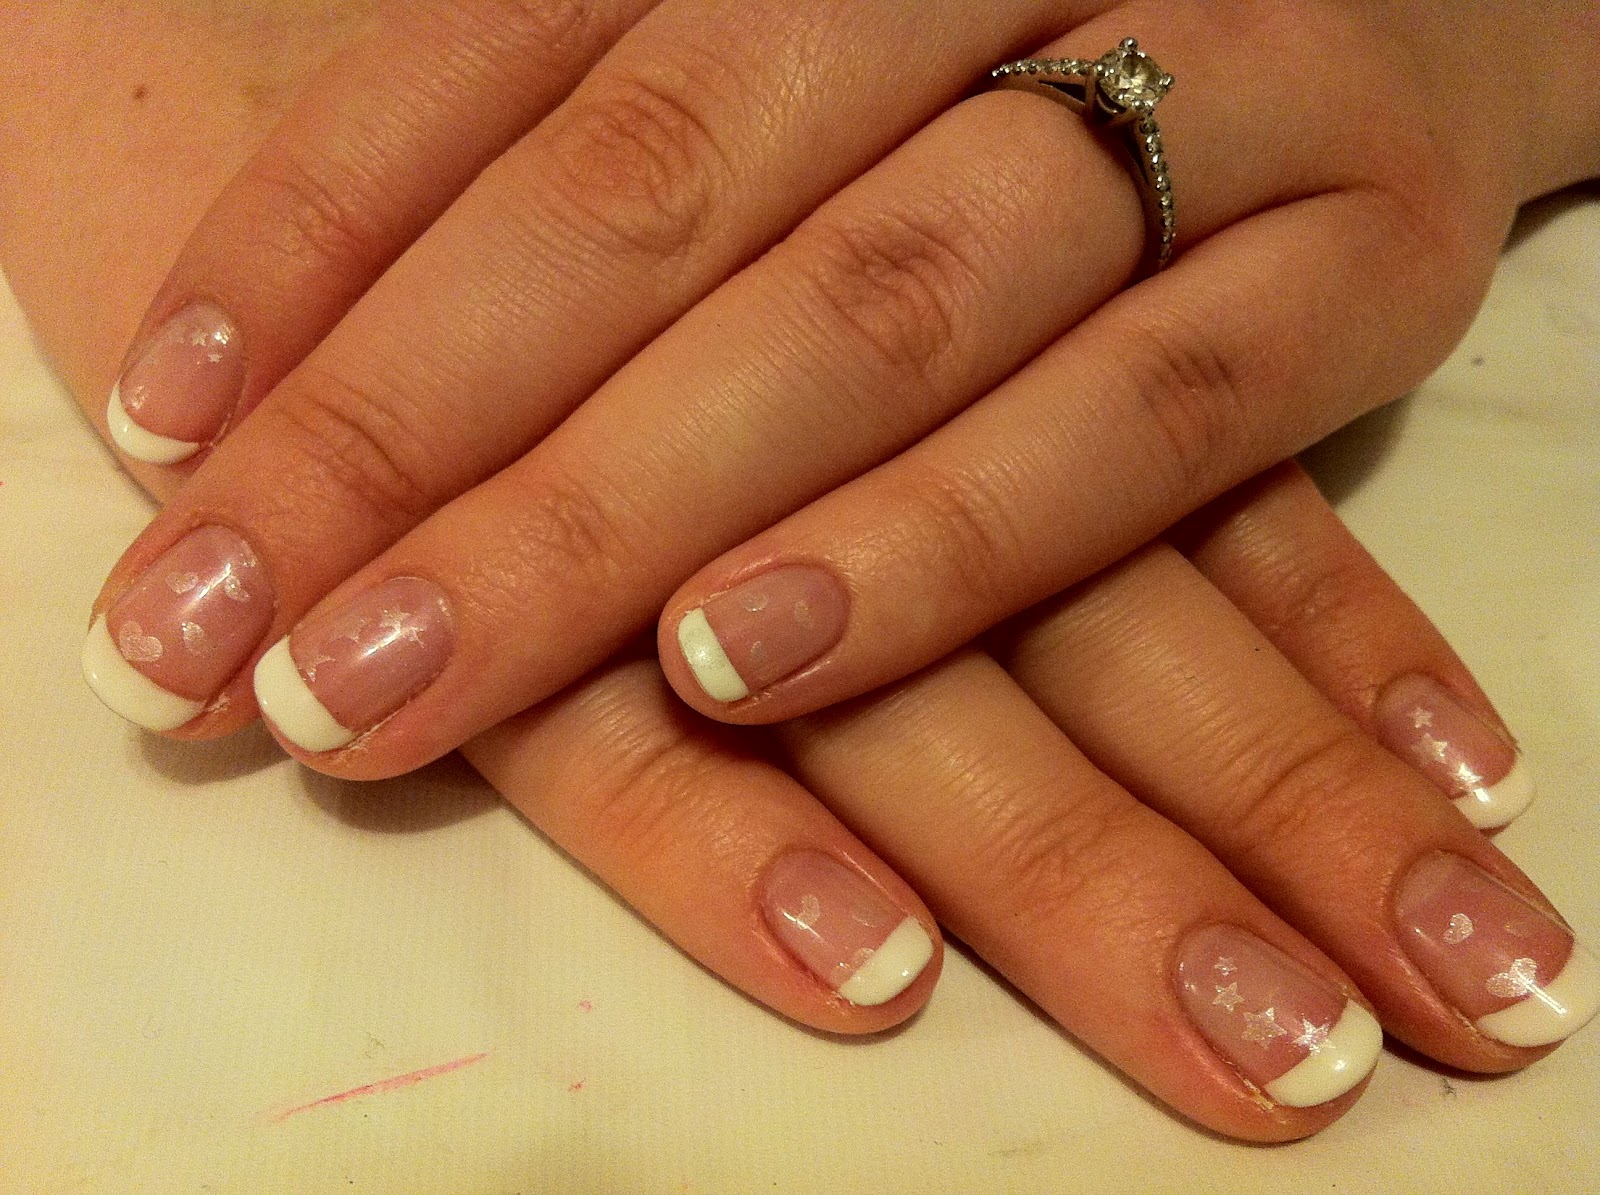 6. CND Shellac Nail Art Tutorial: French Manicure - wide 3